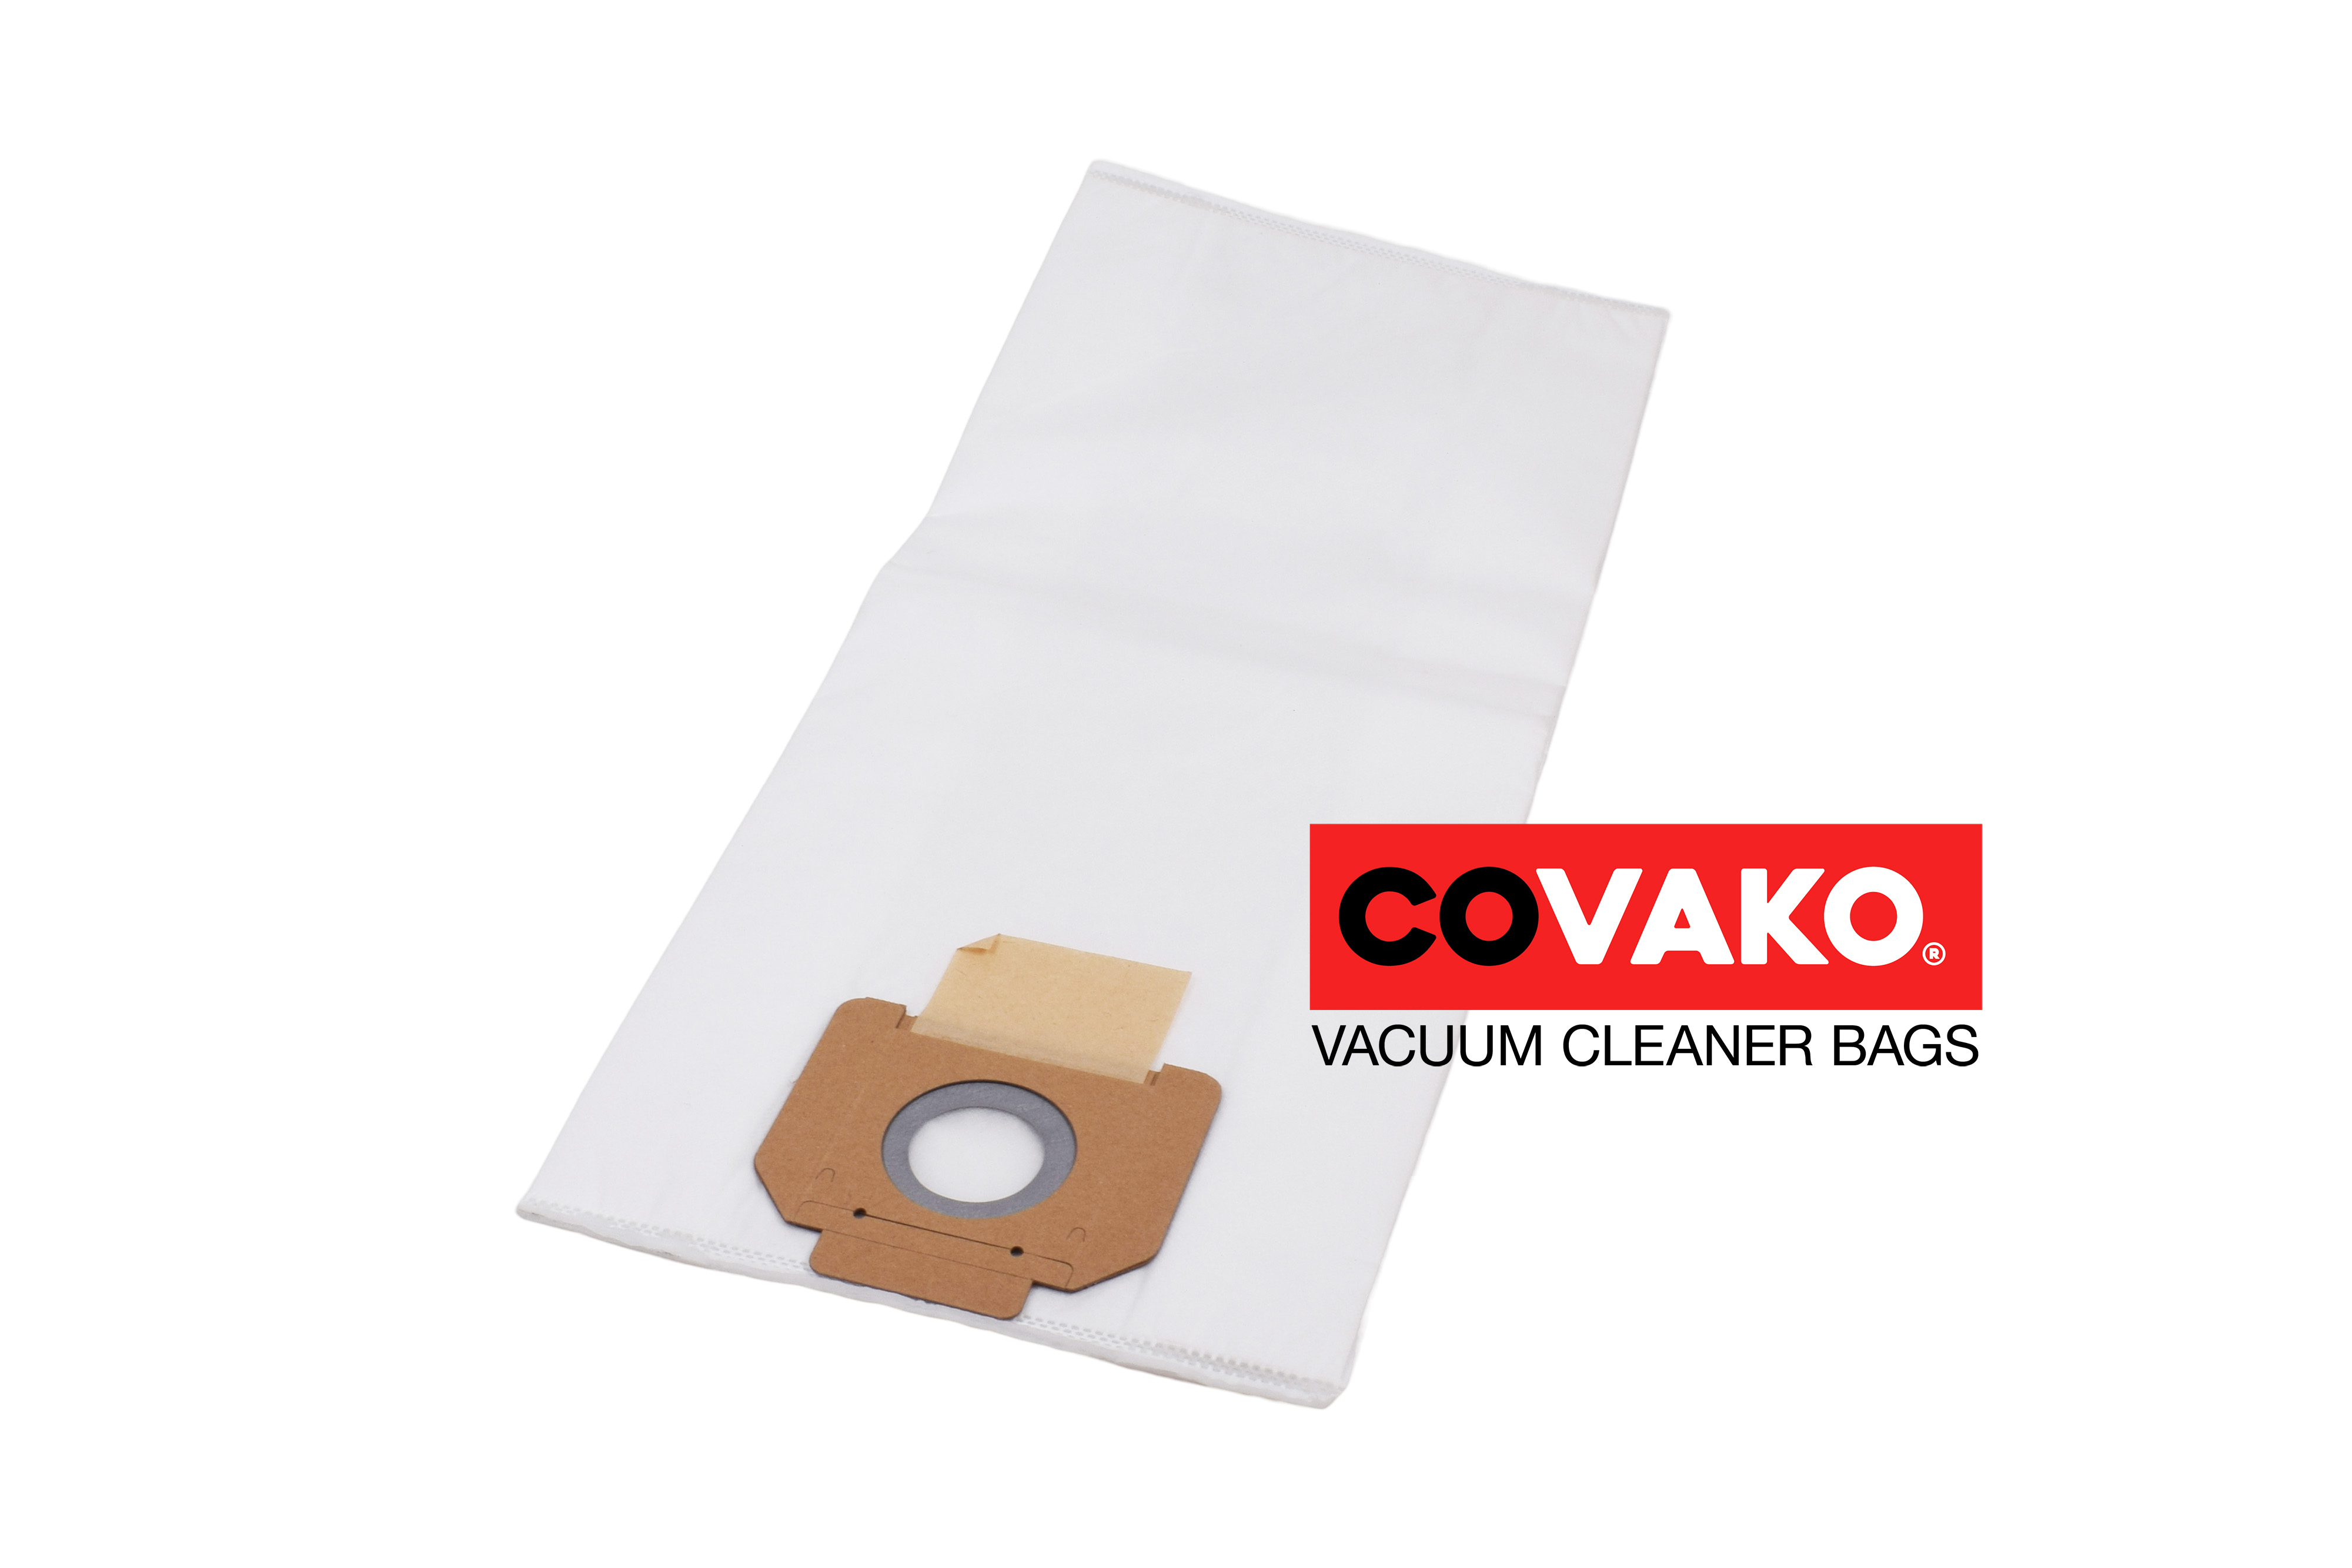 Gansow GS 60/2 EP / Synthesis - Gansow vacuum cleaner bags